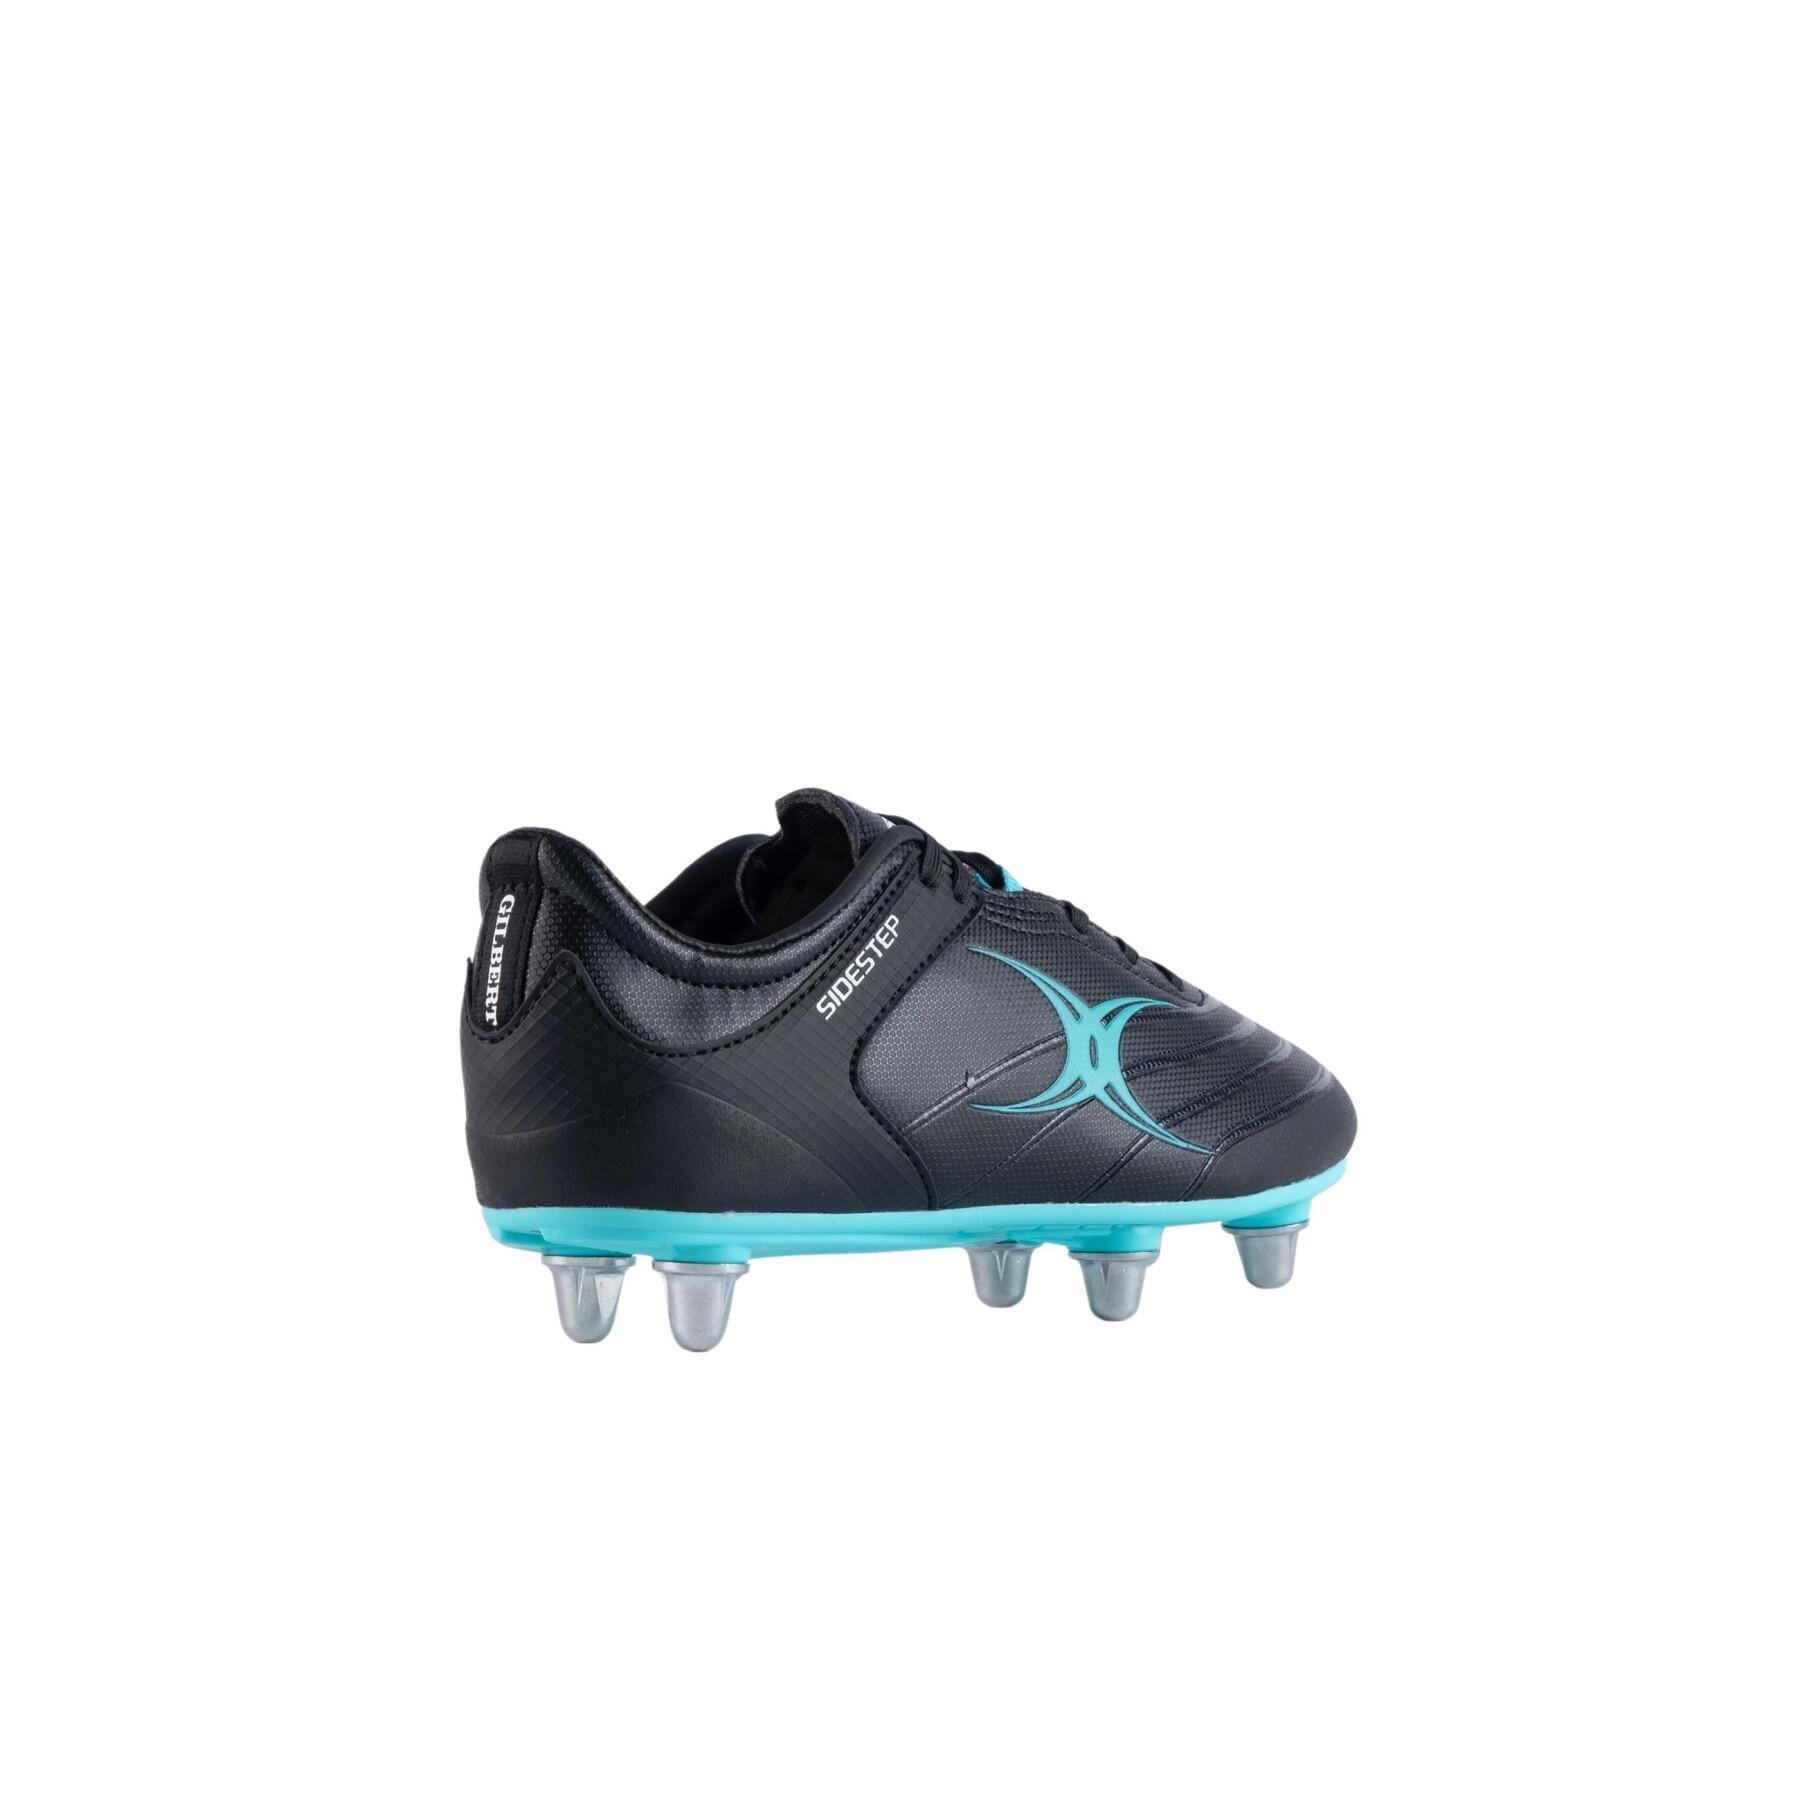 Rugby shoes Gilbert Sidestep X15 LO 6S